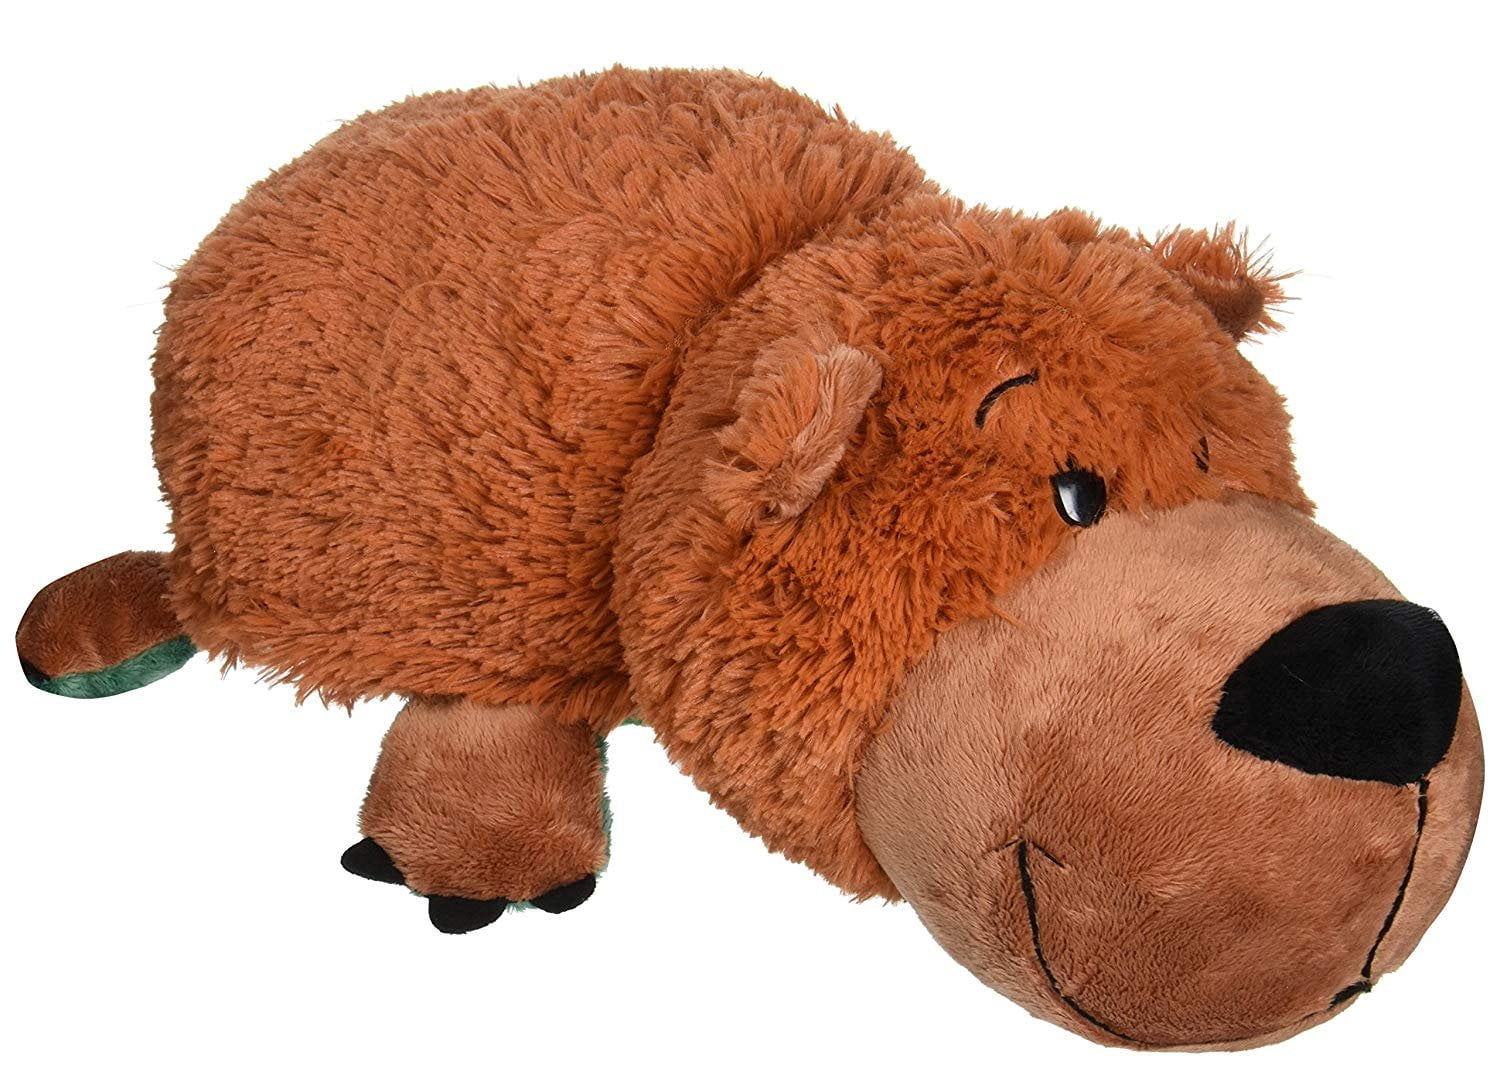 FlipaZoo The 16 Plush with 2 Sides of Fun for Everyone Grizzly Bear / Alligator by FlipaZoo Each Huggable FlipaZoo character is Two Wonderful Collectibles in One